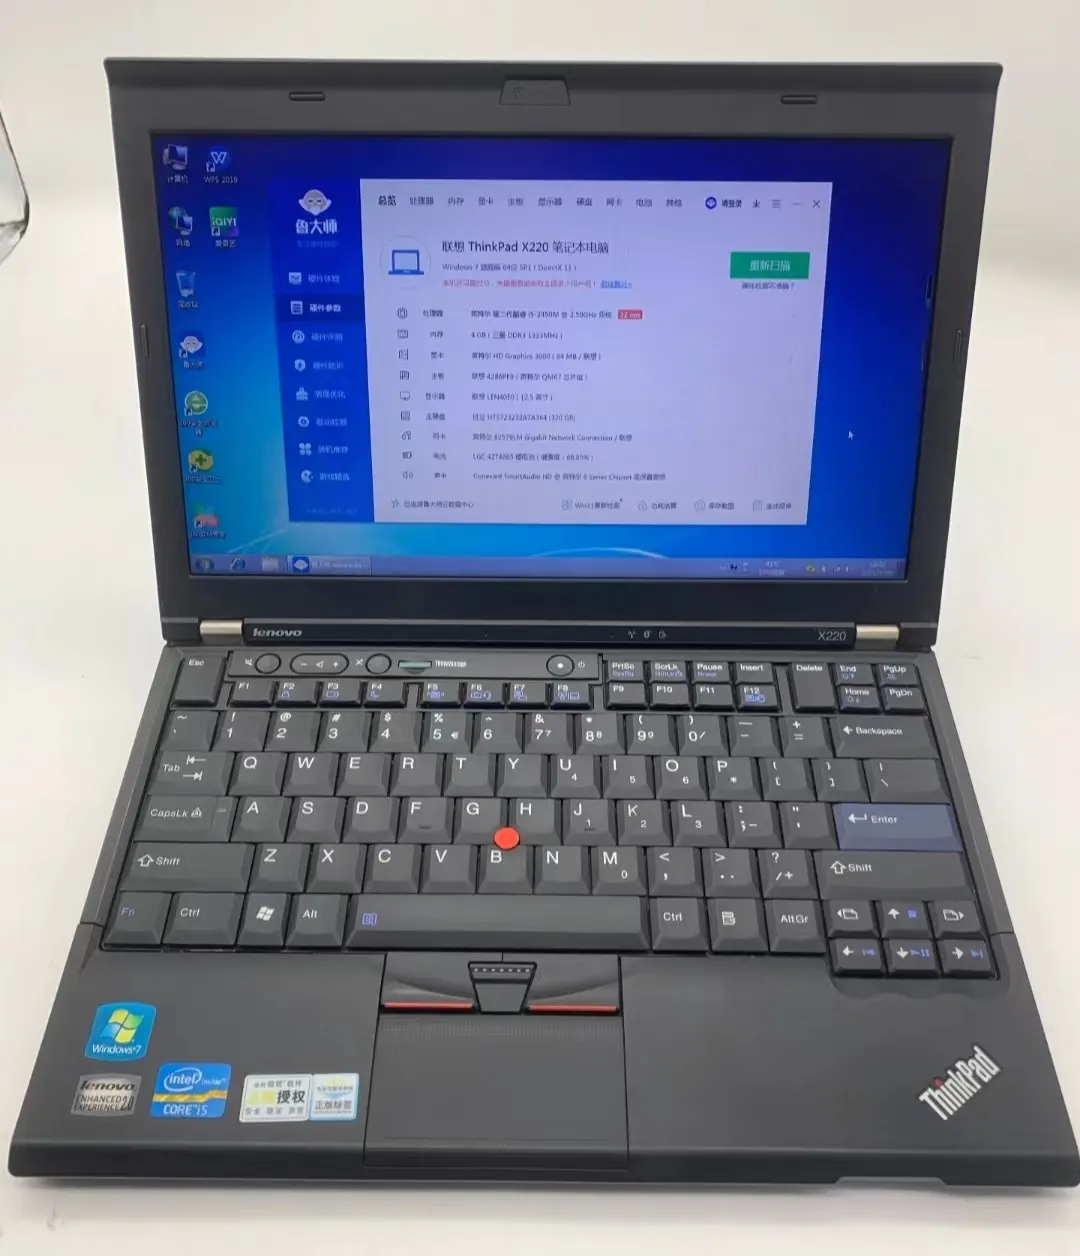 Low Price X220 Used Laptops Core I5 12.5-Inch Ram 4gb Hdd 320gb Second-Hand Laptop For Lenovo Thinkpad Business Laptop Used